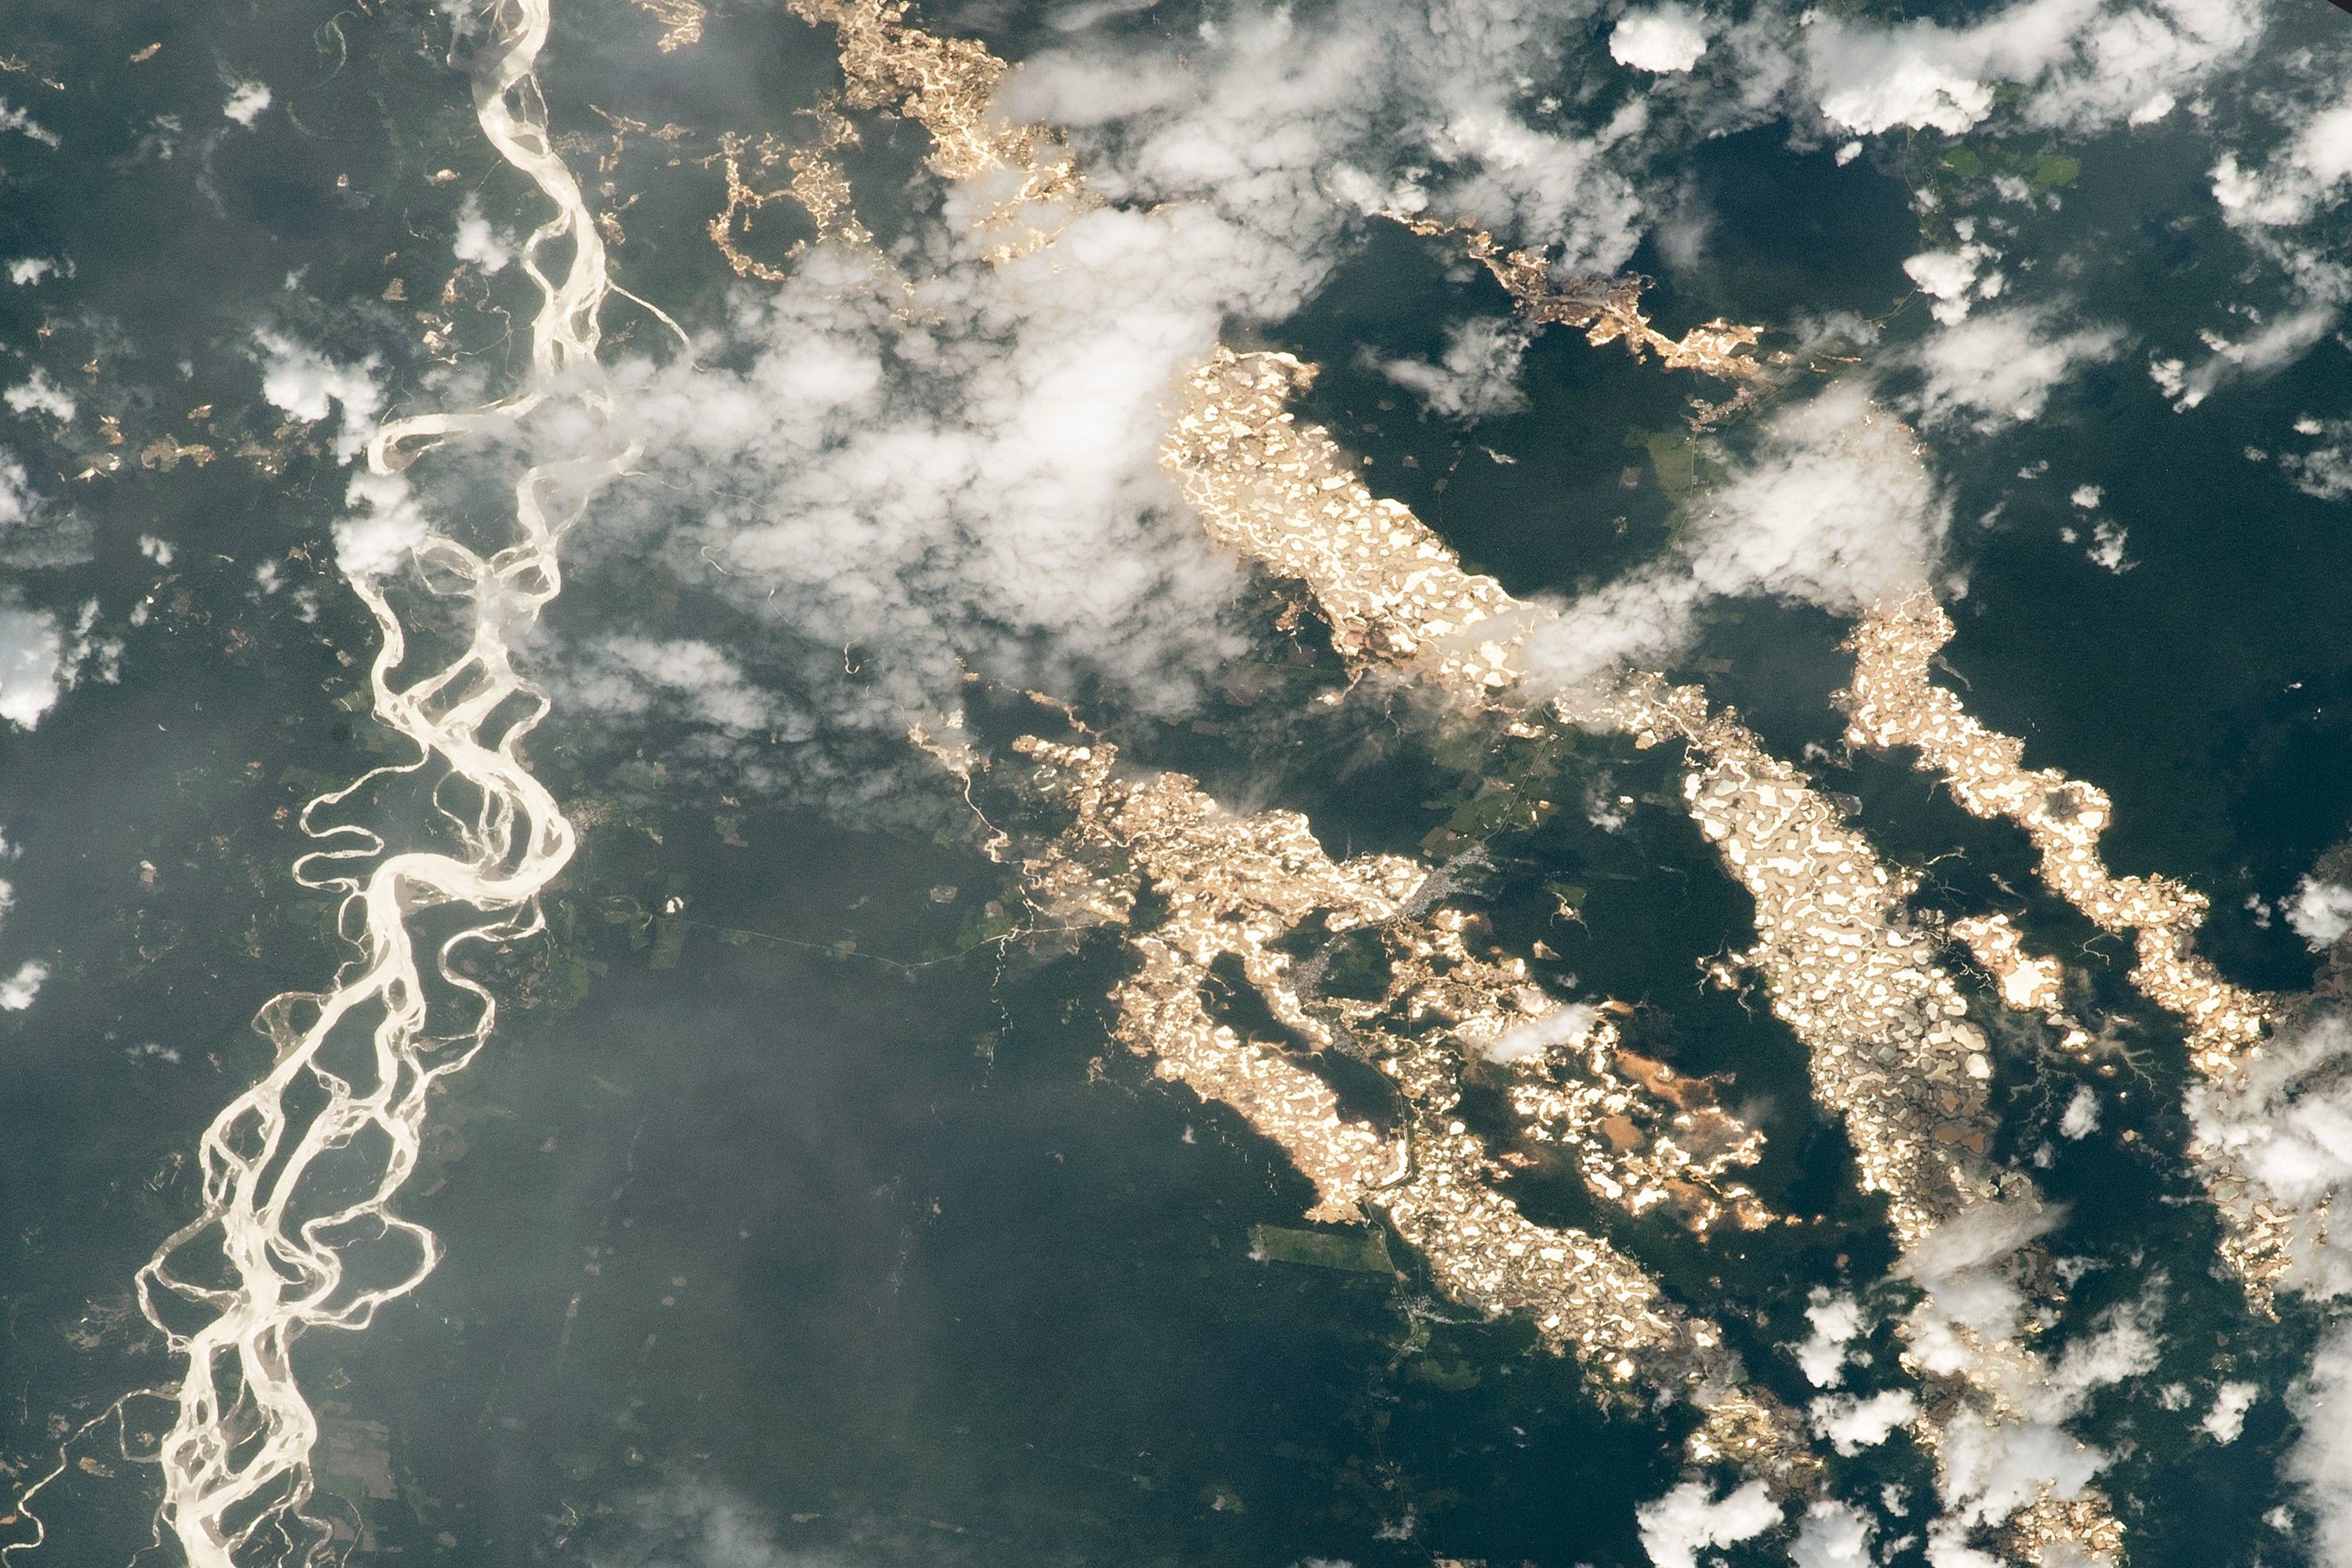 This image of Peru’s Amazon rainforest was captured by an astronaut from the International Space Station